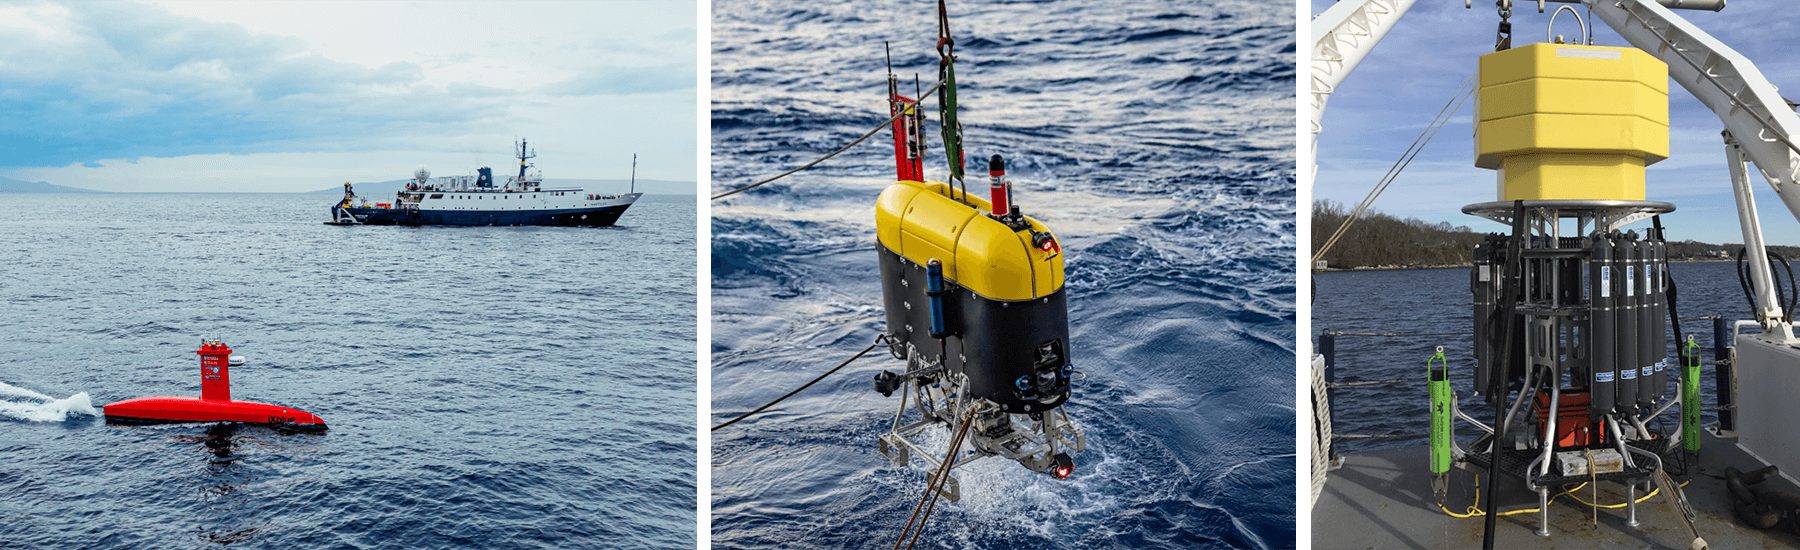 Left: Uncrewed surface vessel DriX with Exploration Vessel Nautilus in the background. Center: Autonomous underwater vehicle Mesobot being recovered from the ocean. Right: The Deep Autonomous Profiler Lander on the deck of Exploration Vessel Nautilus.